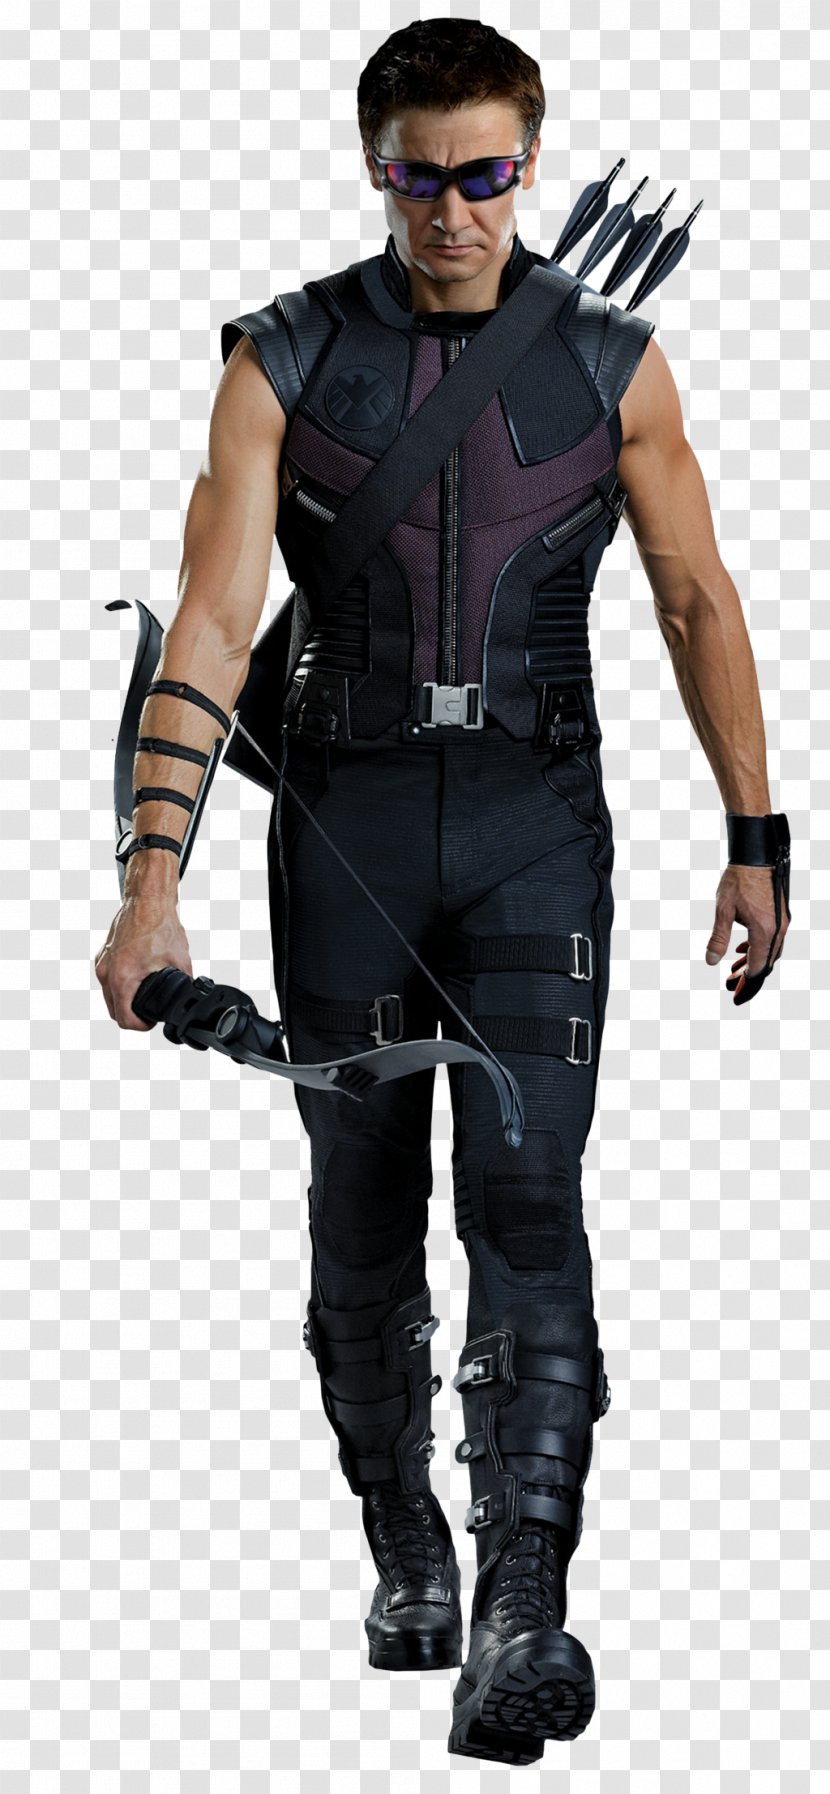 Jeremy Renner Clint Barton Black Widow Captain America Avengers: Age Of Ultron - Clothing - Hawkeye Transparent PNG